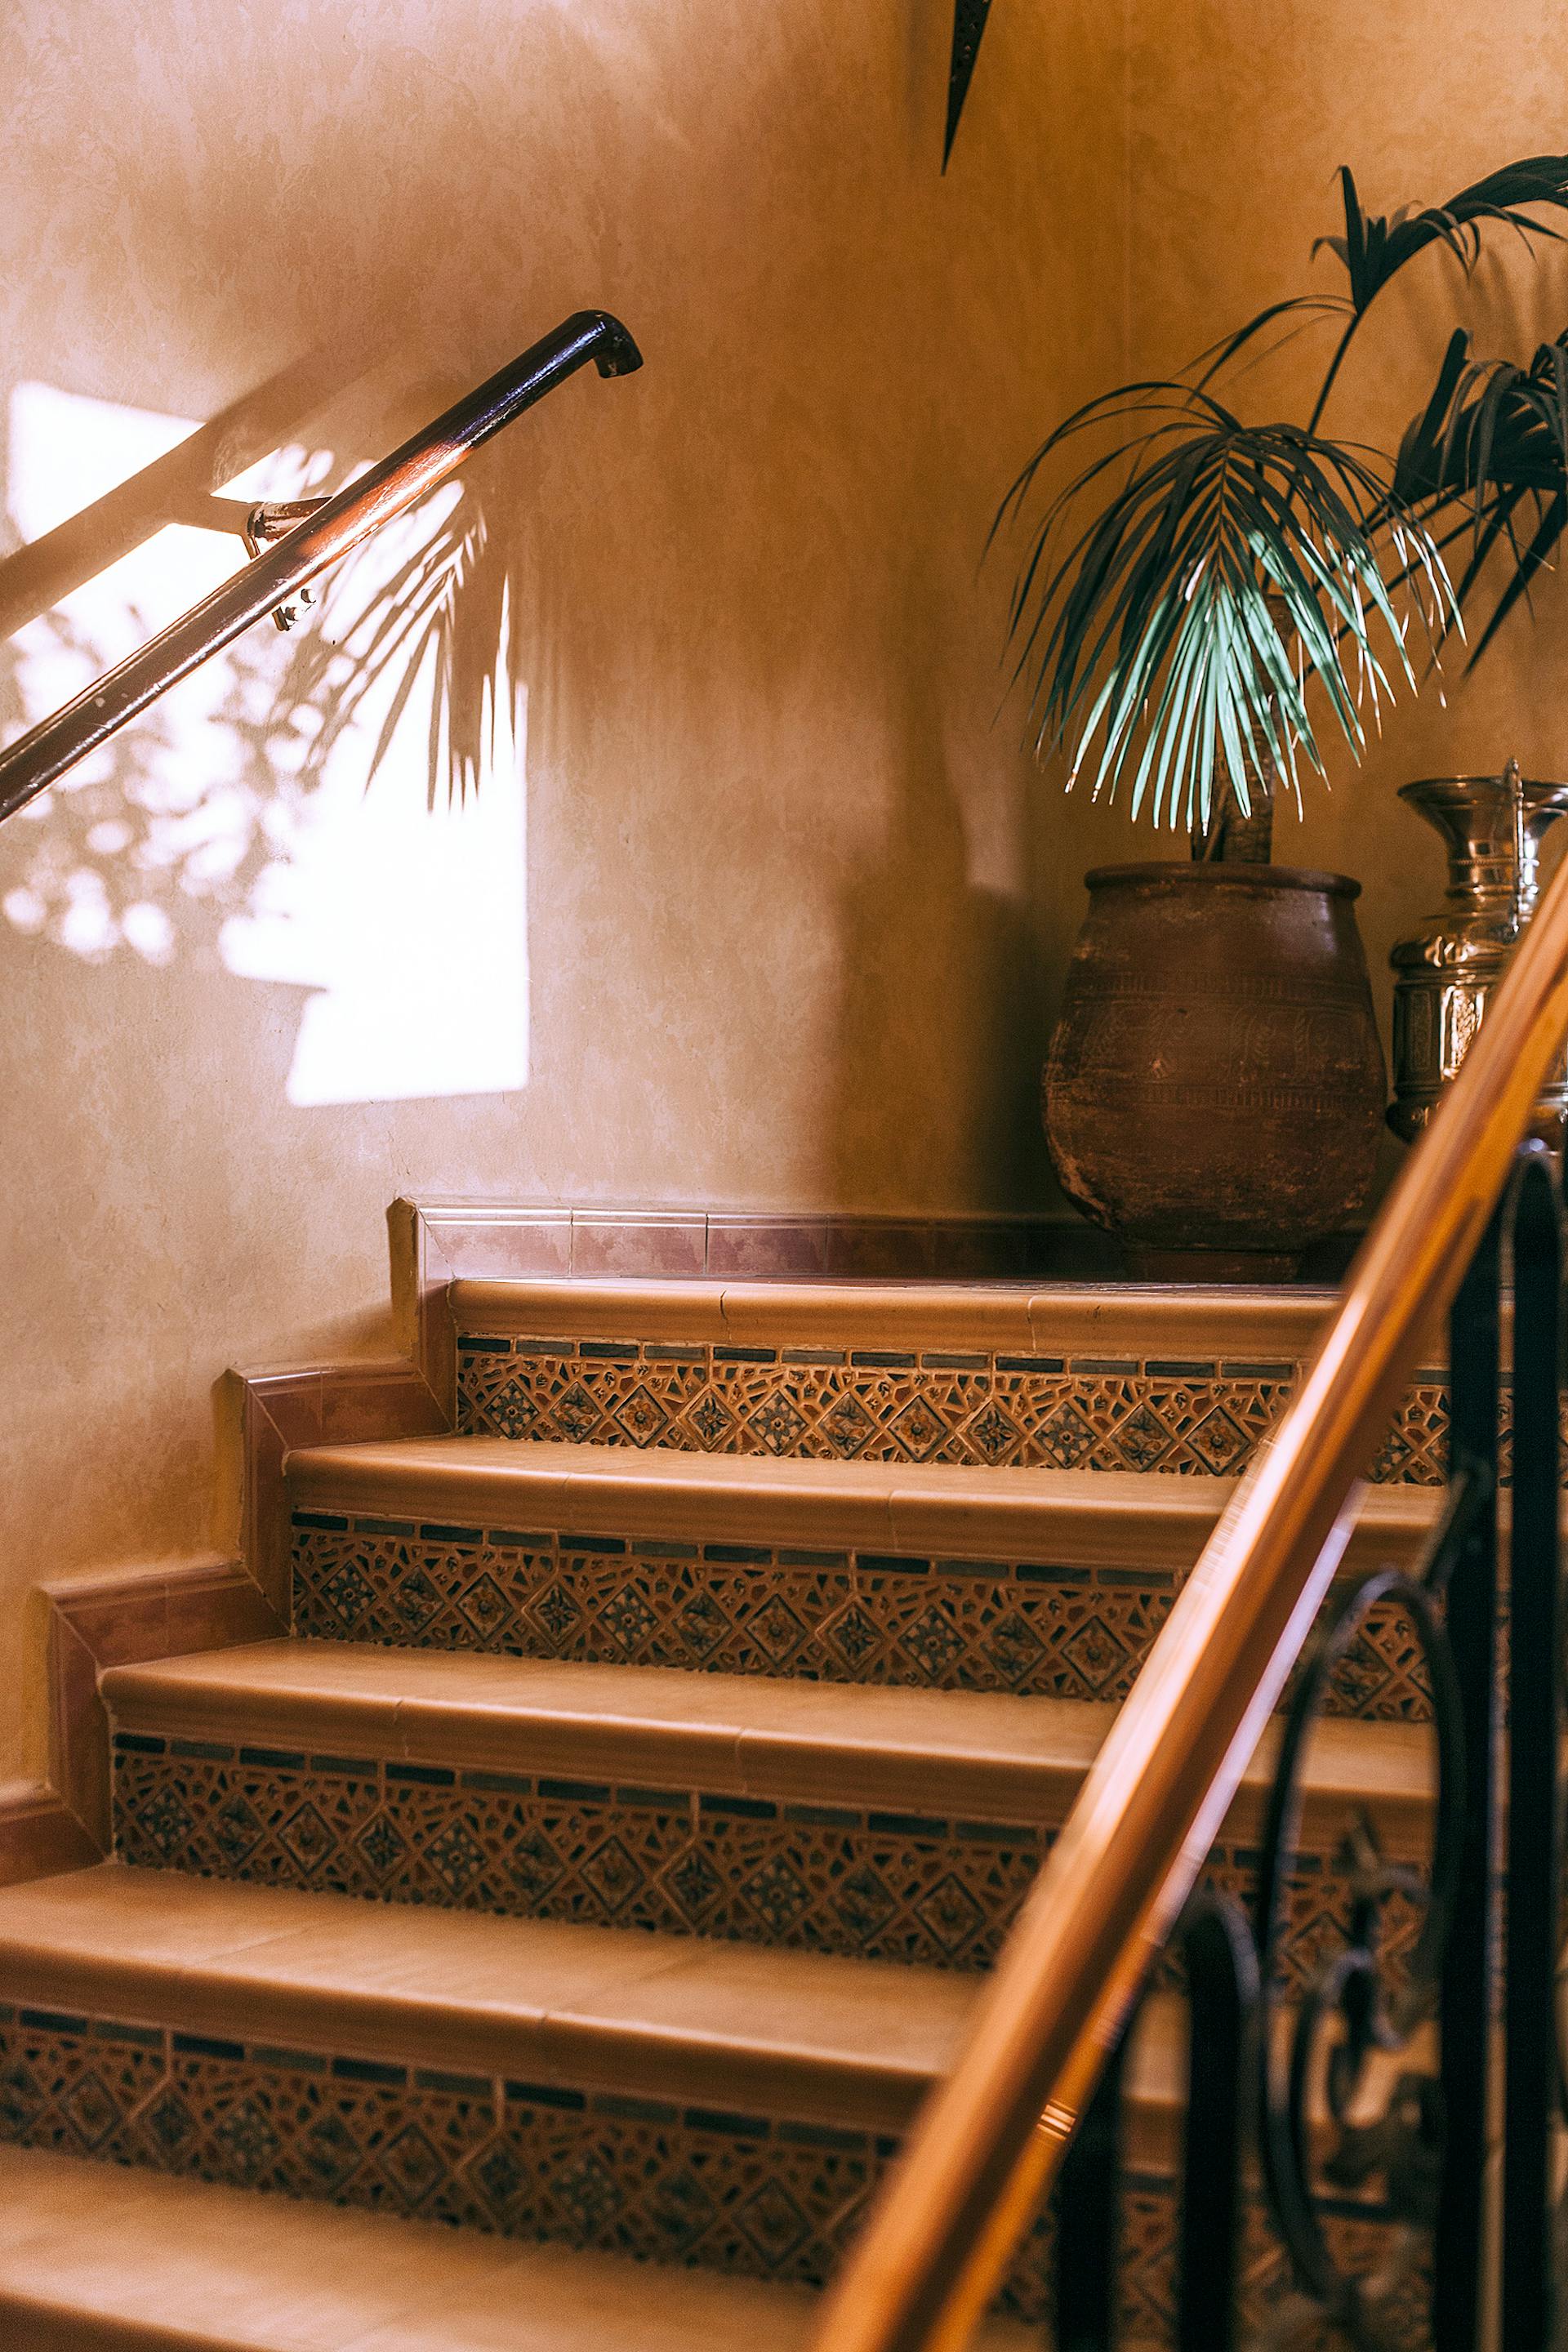 A brown colored stone staircase in a house | Source: Pexels